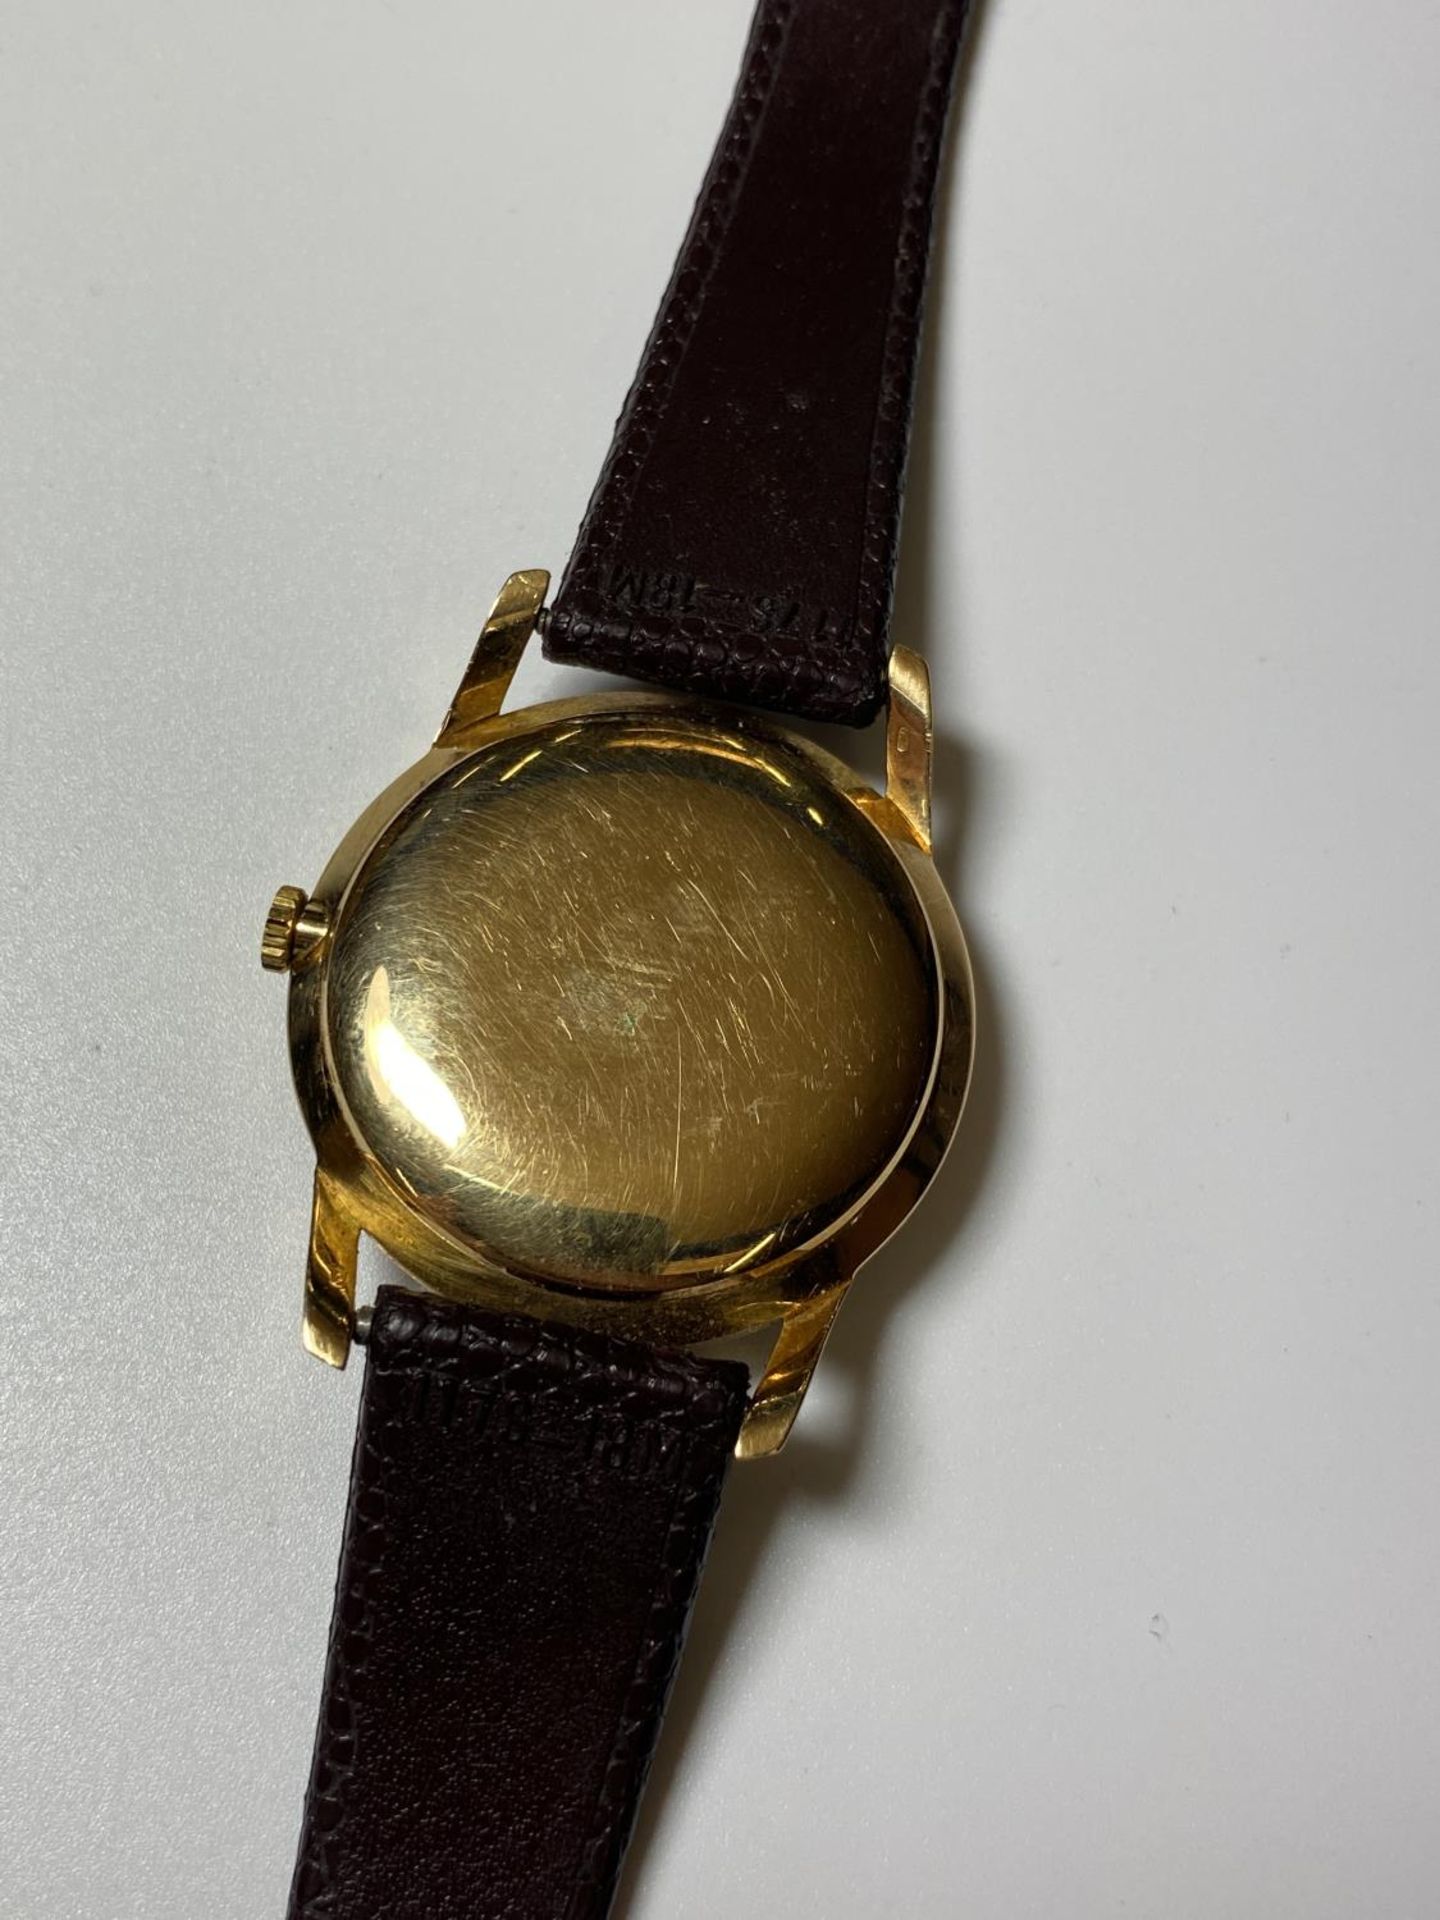 A VINTAGE 1960'S GENTS 9CT GOLD CASED 'CYMA' CYMAFLEX DATE WATCH - Image 2 of 3